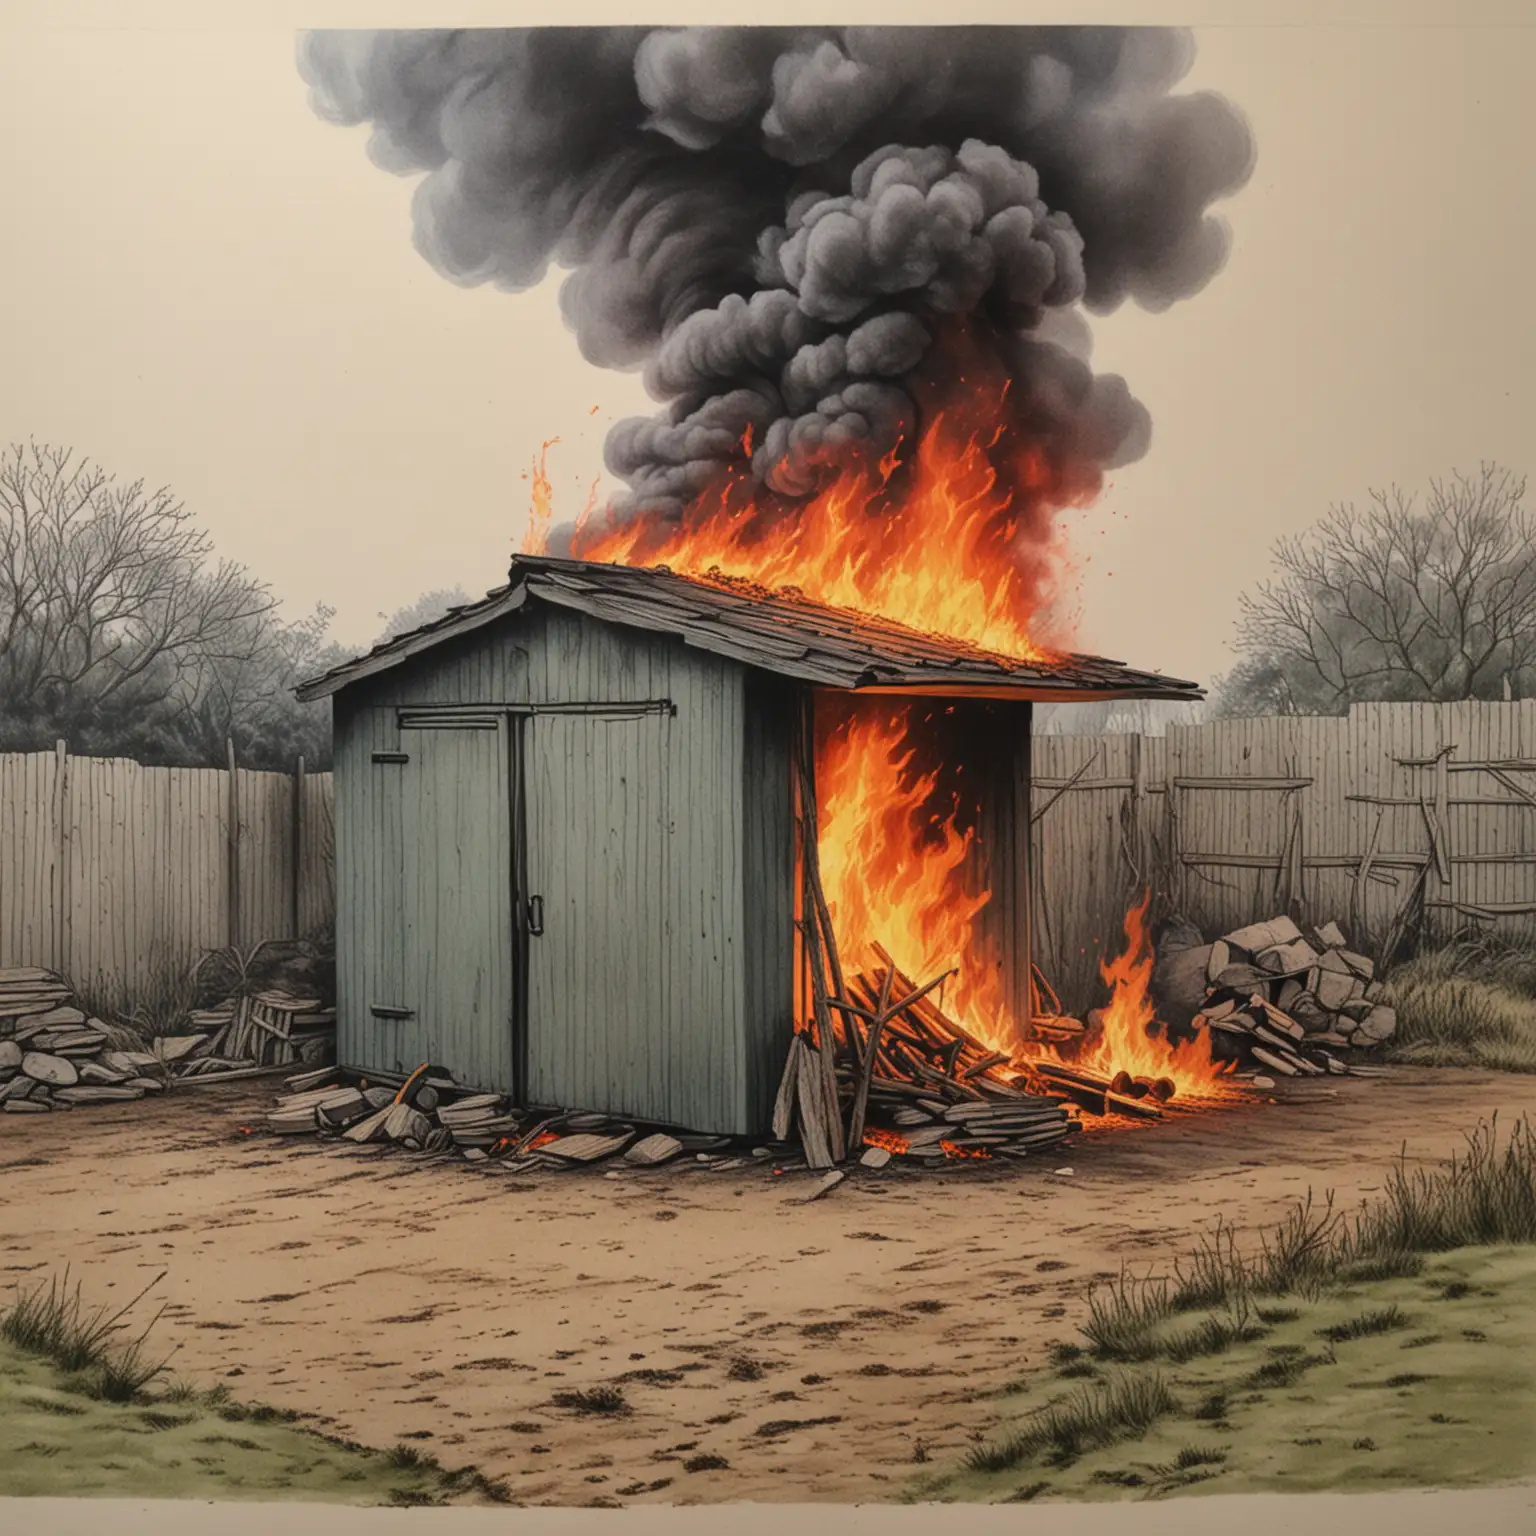 Colorful Drawing of a Burning Shed